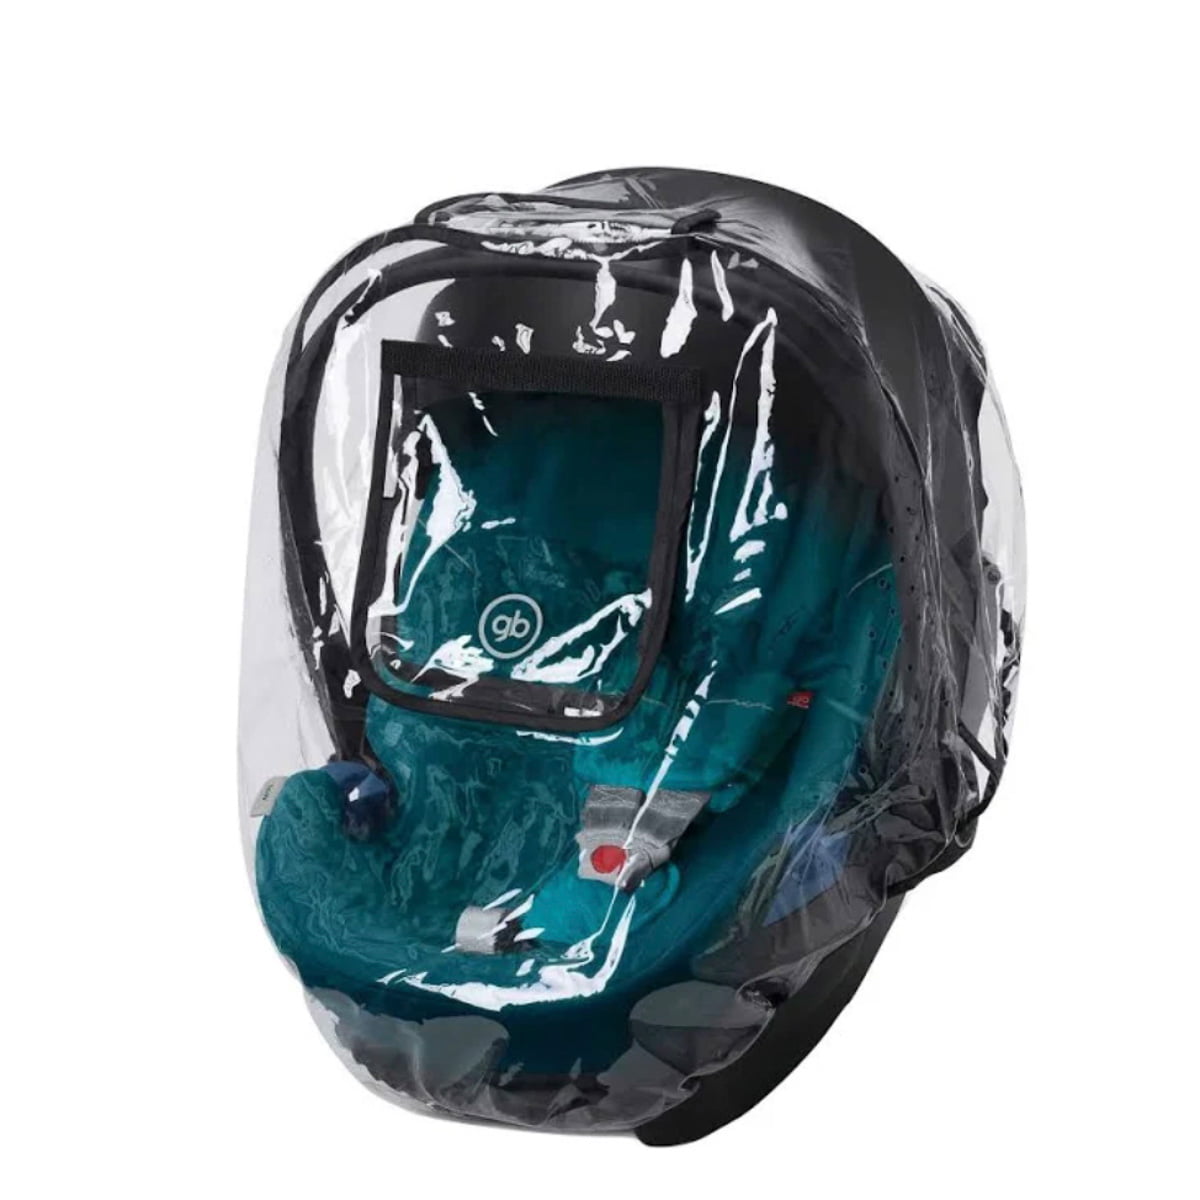 uppababy car seat rain cover